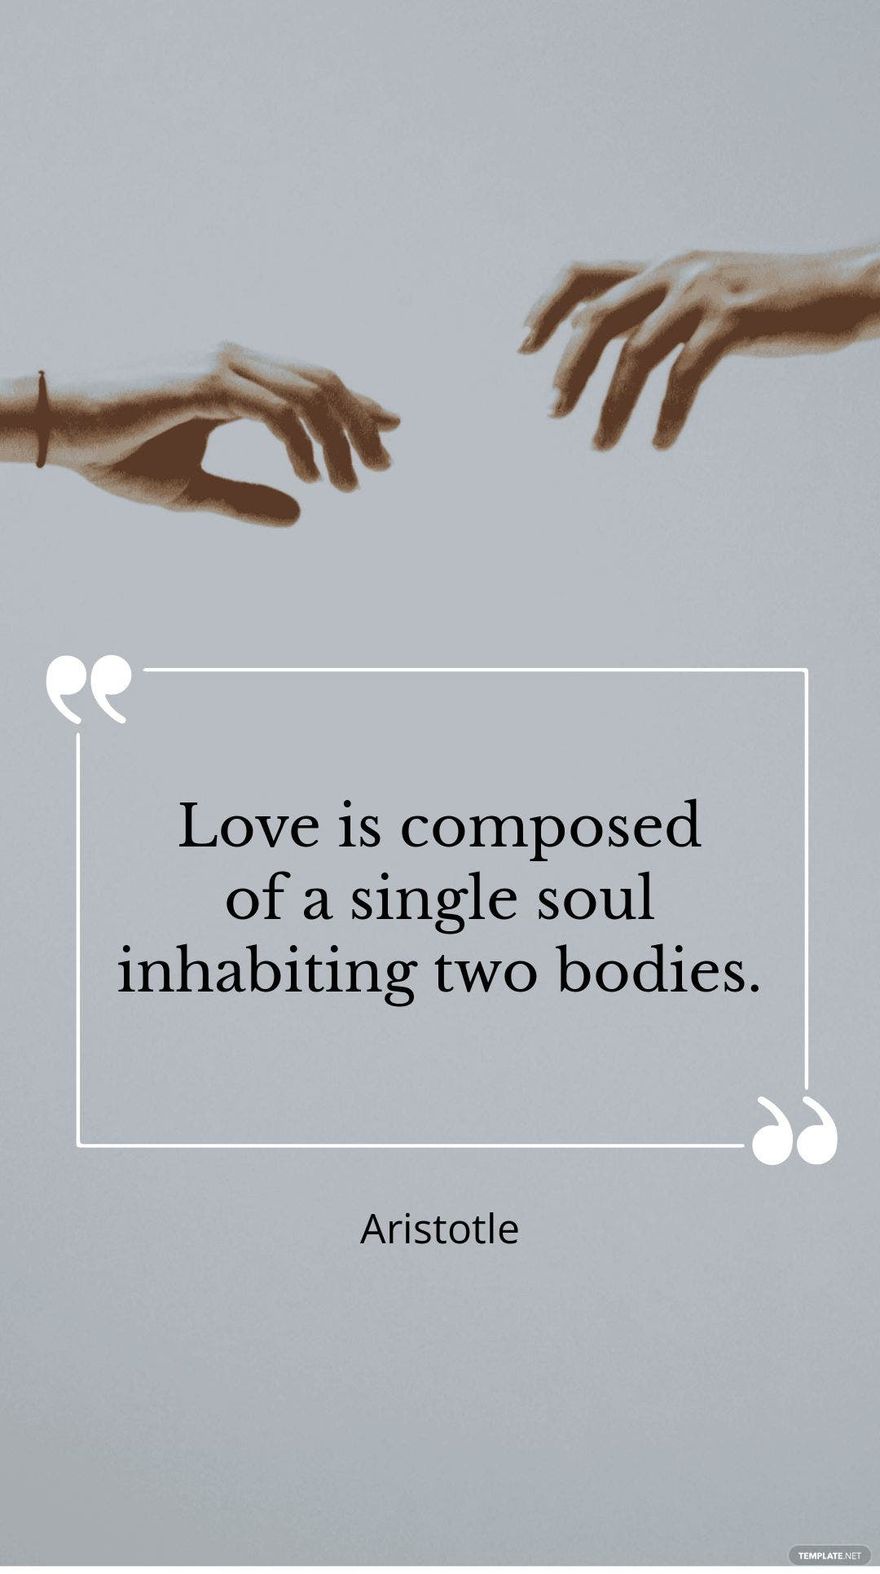 Aristotle - ”Love is composed of a single soul inhabiting two bodies.” 